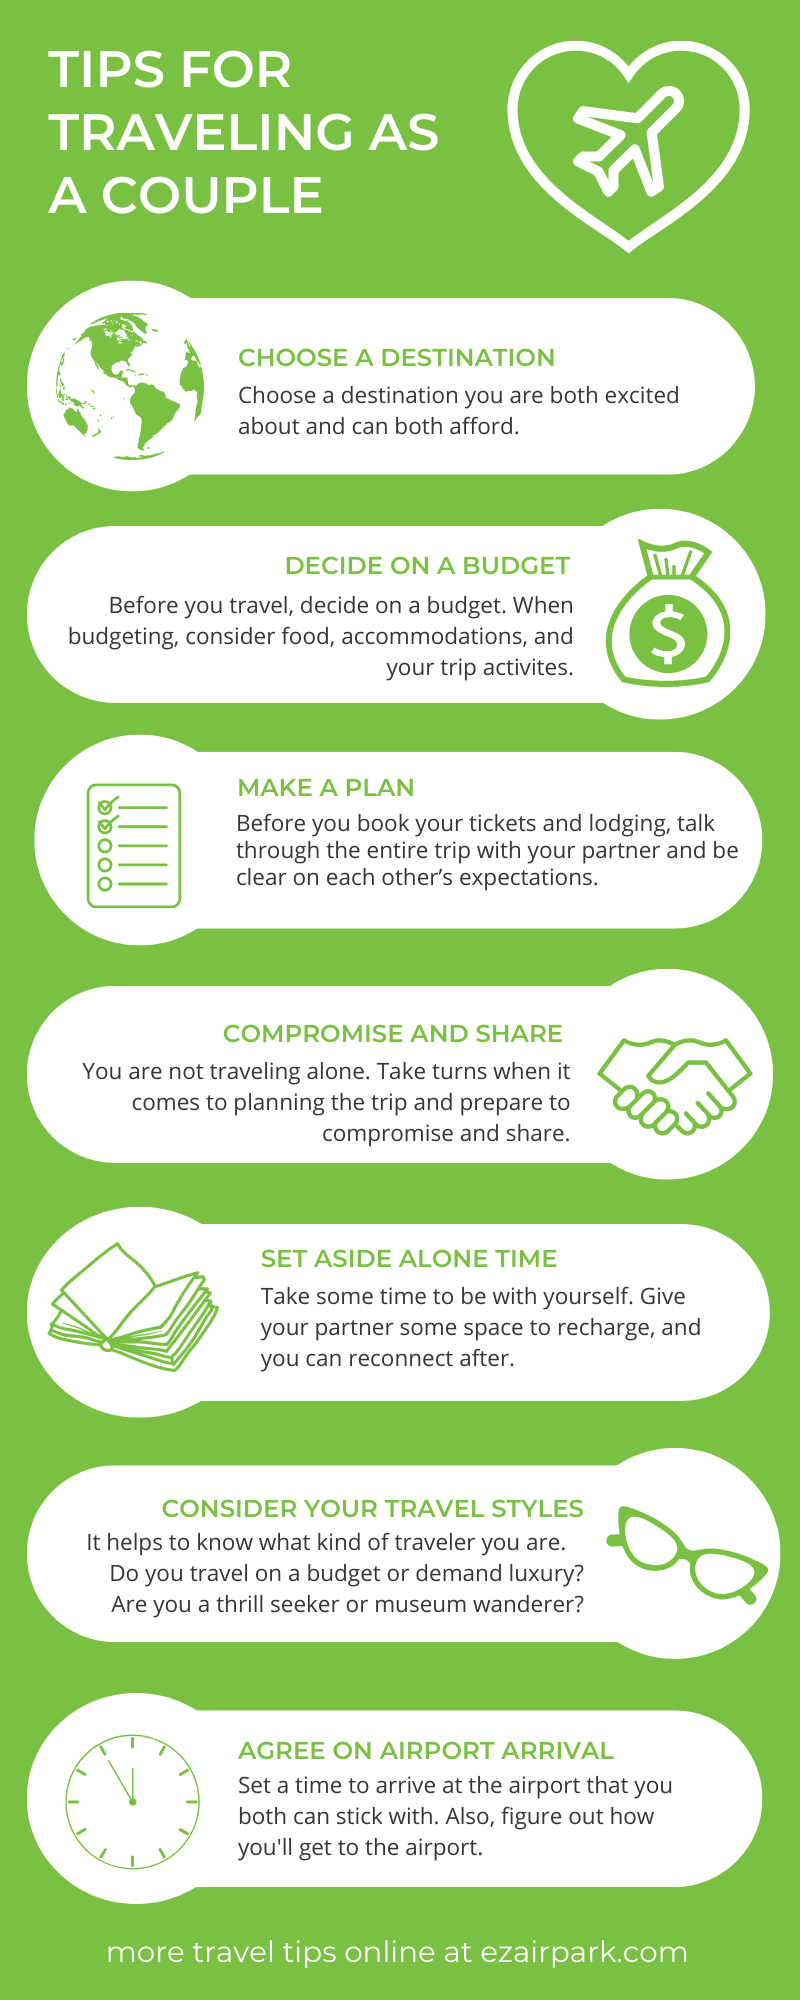 infographic explaining how to travel as a couple for the first time.